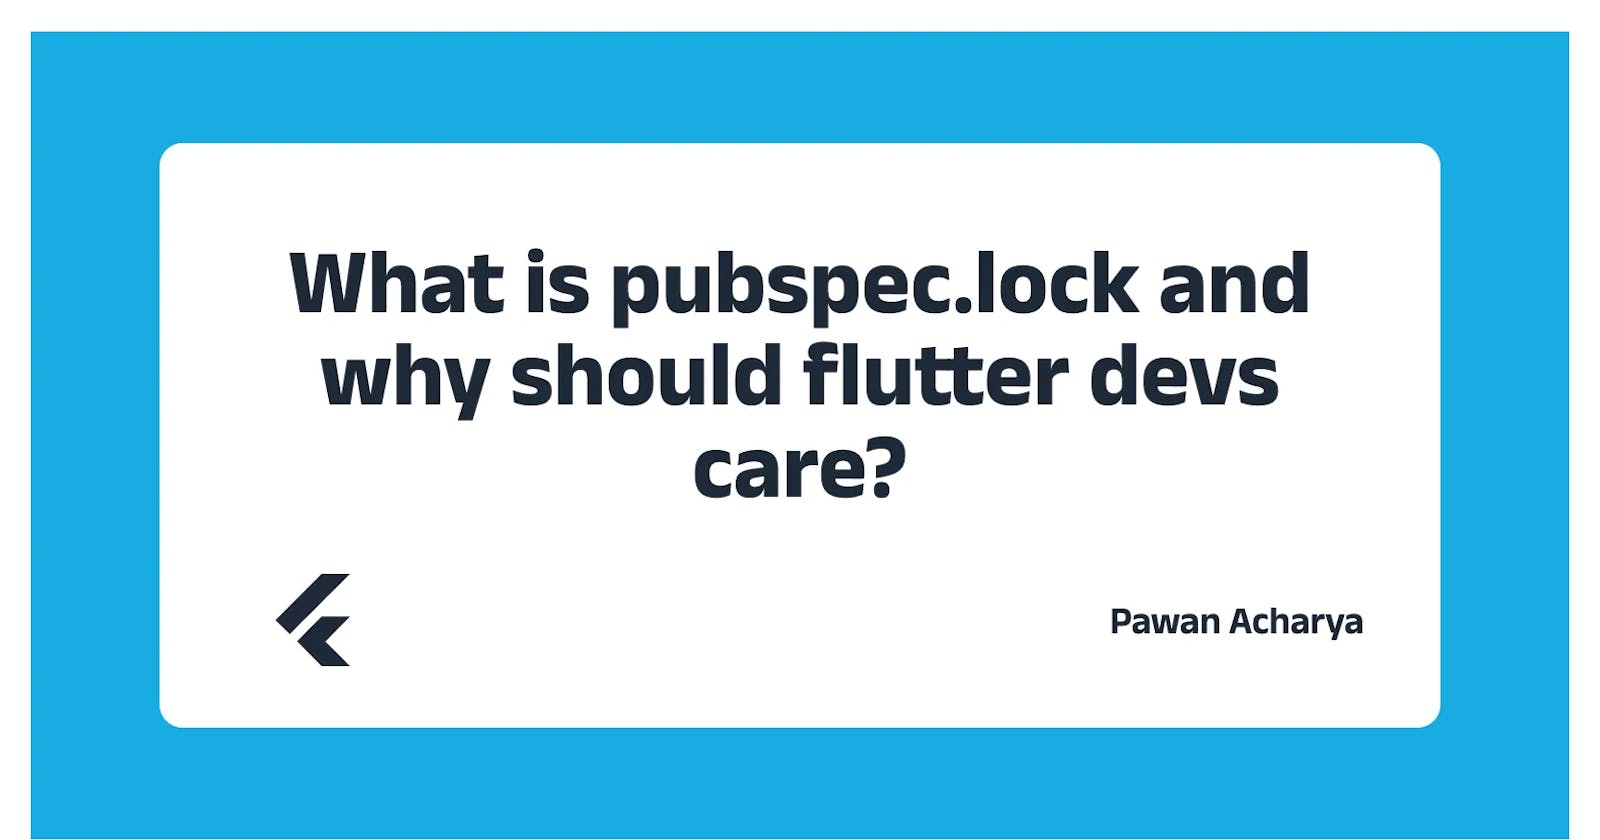 What is pubspec.lock and why should flutter devs care?